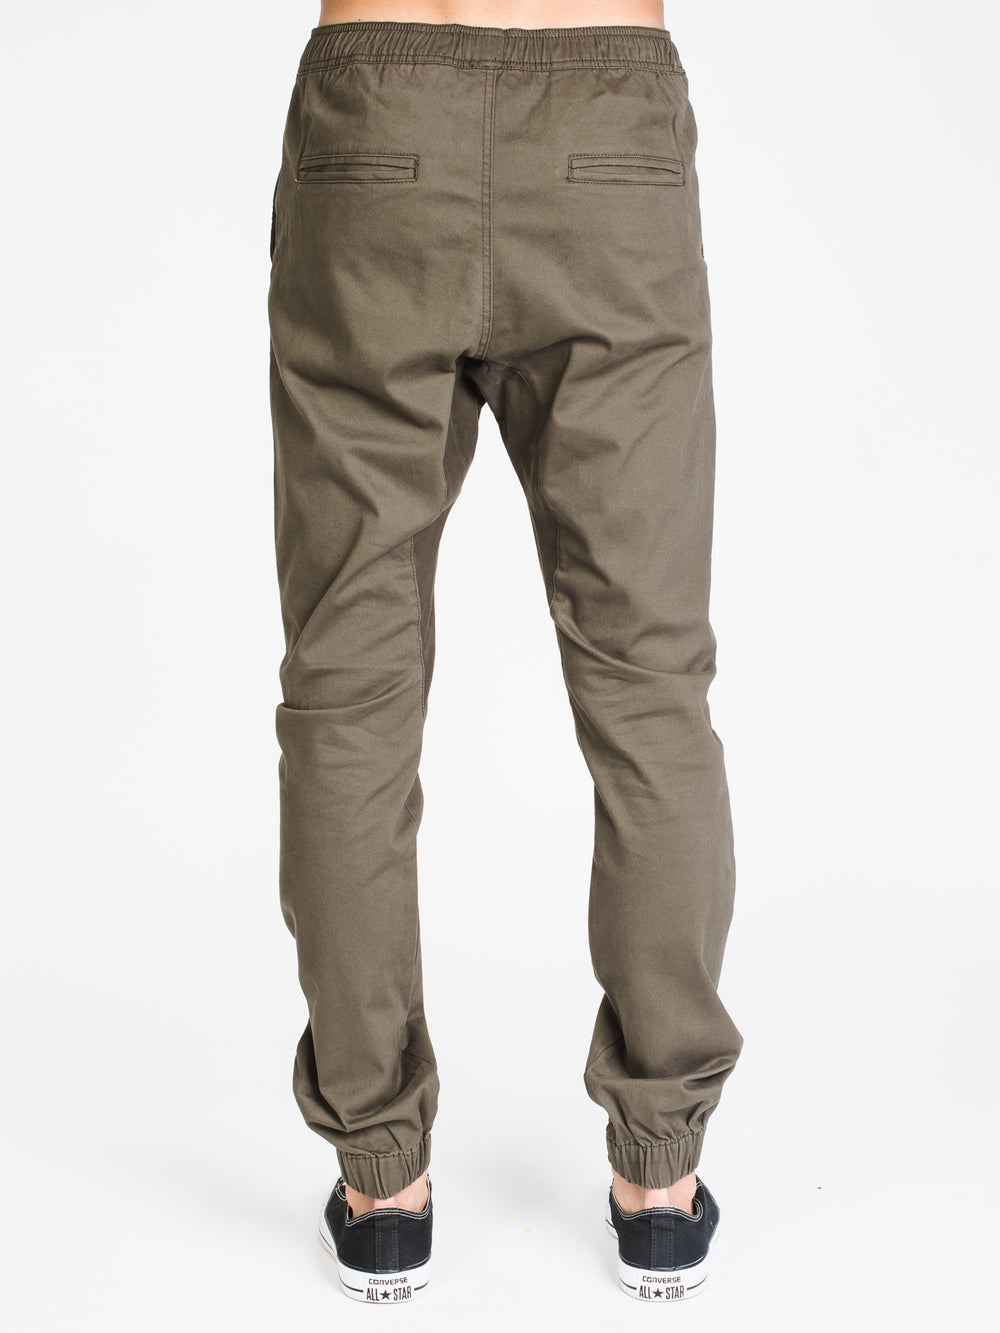 MENS PROJECT ZANEROBE JOGGER - OLIVE - CLEARANCE